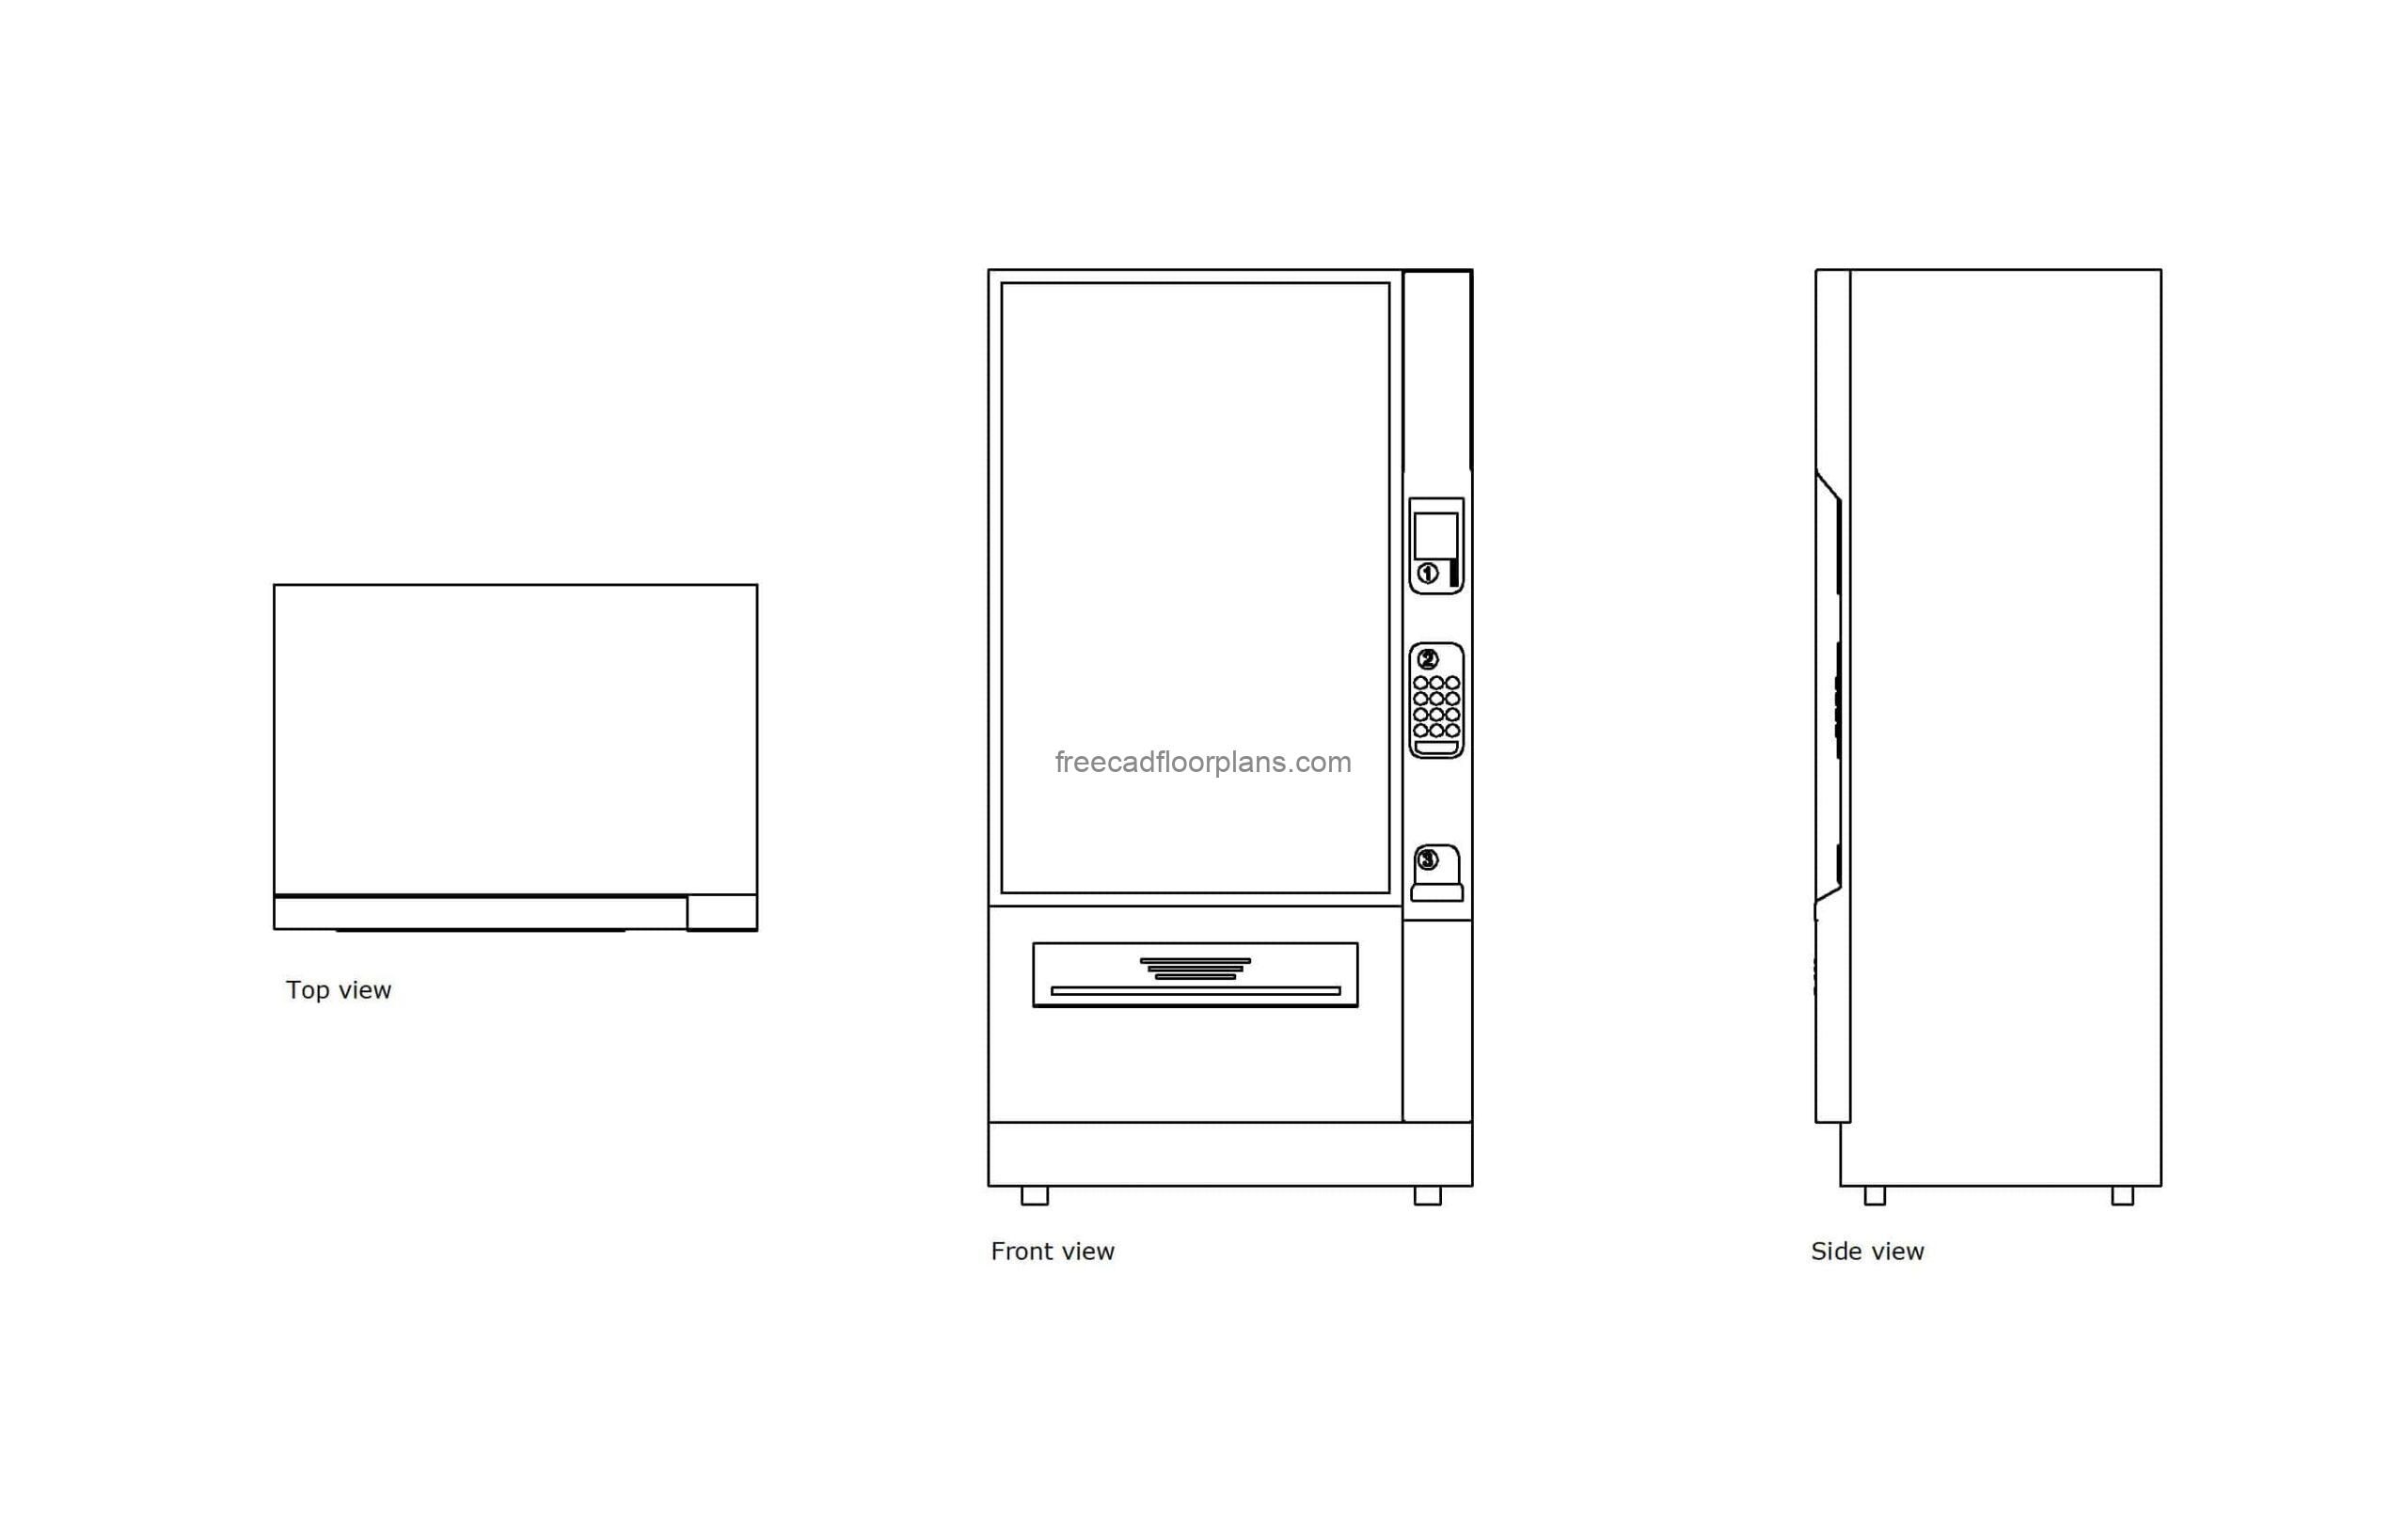 autocad drawing of a food vending machine, 2d views, plan and elevation, dwg file free for download